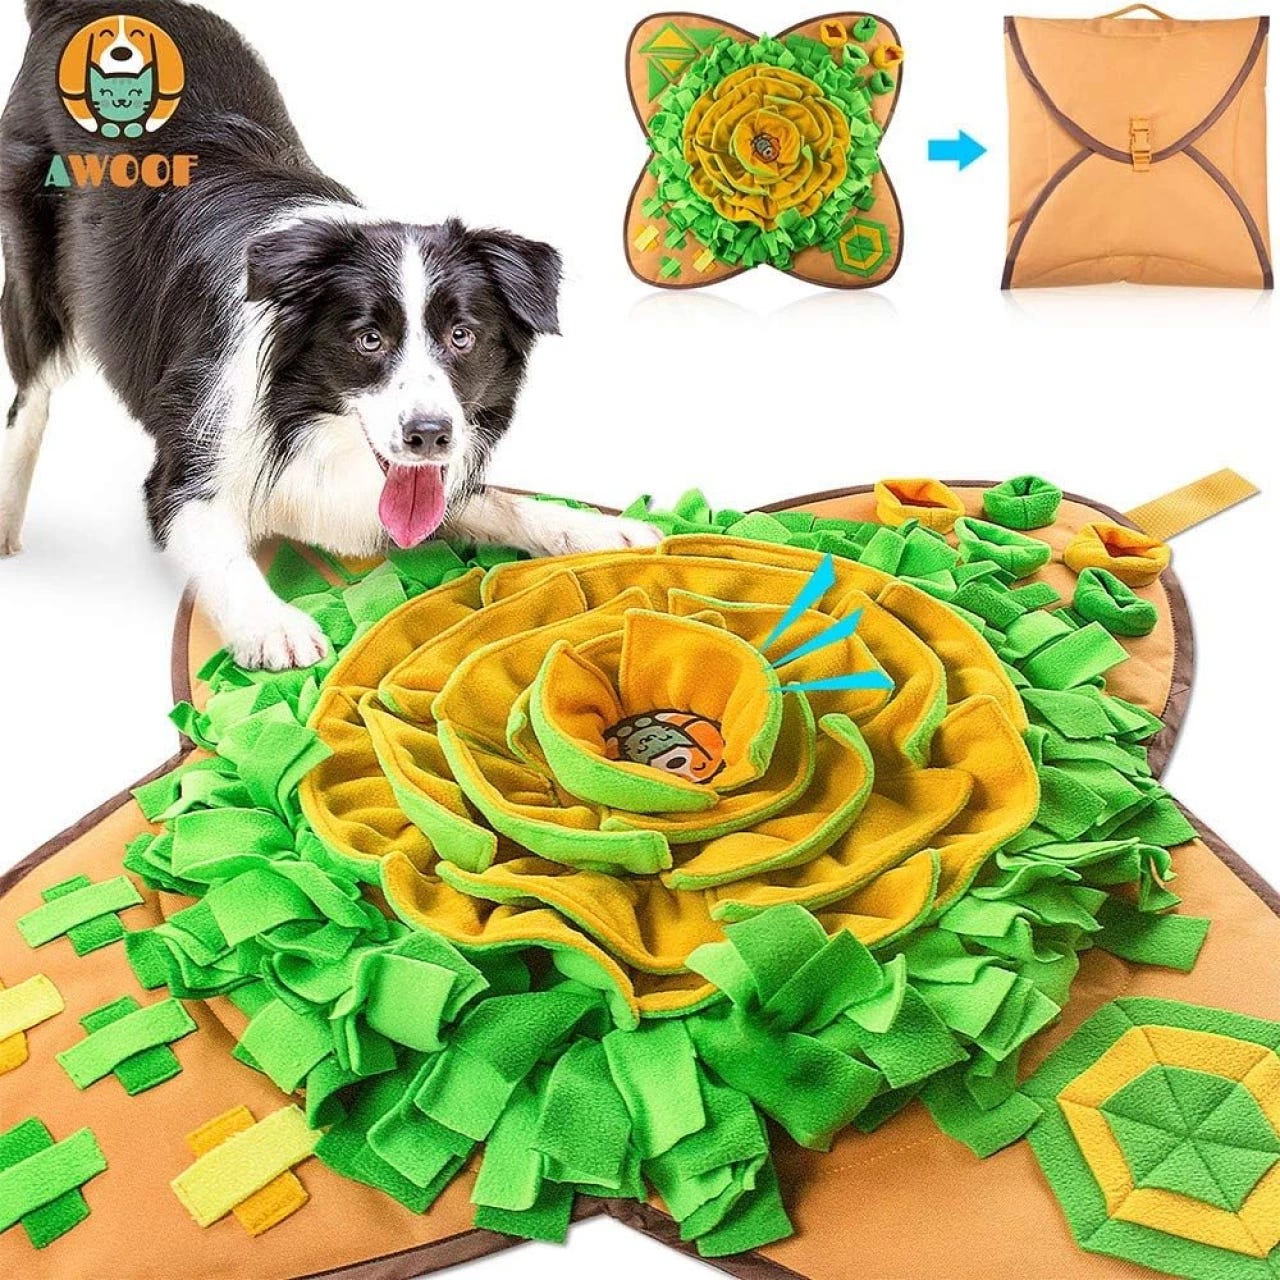 Dog Puzzle Toys, Pet Snuffle Mat for Dogs, Interactive Feed Game for Boredom, Encourages Natural Foraging Skills for Cats Dogs Bowl Travel Use, Dog